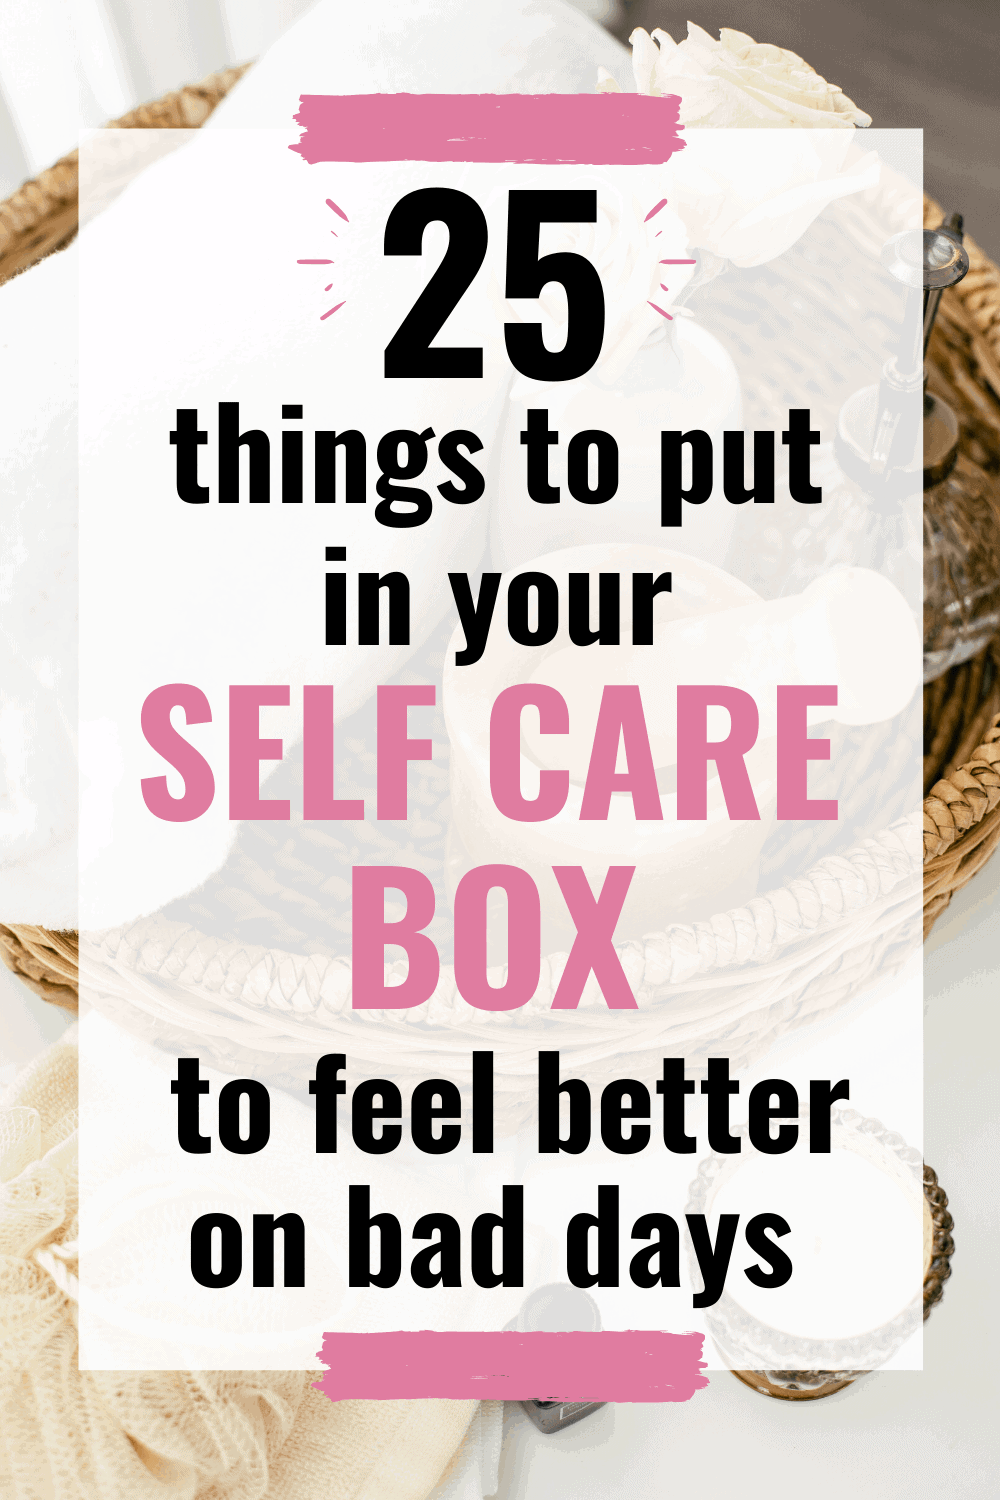 How to create your own self care kit! Ideas of what to put in your stress relief box, so you can pamper yourself when you need it most.